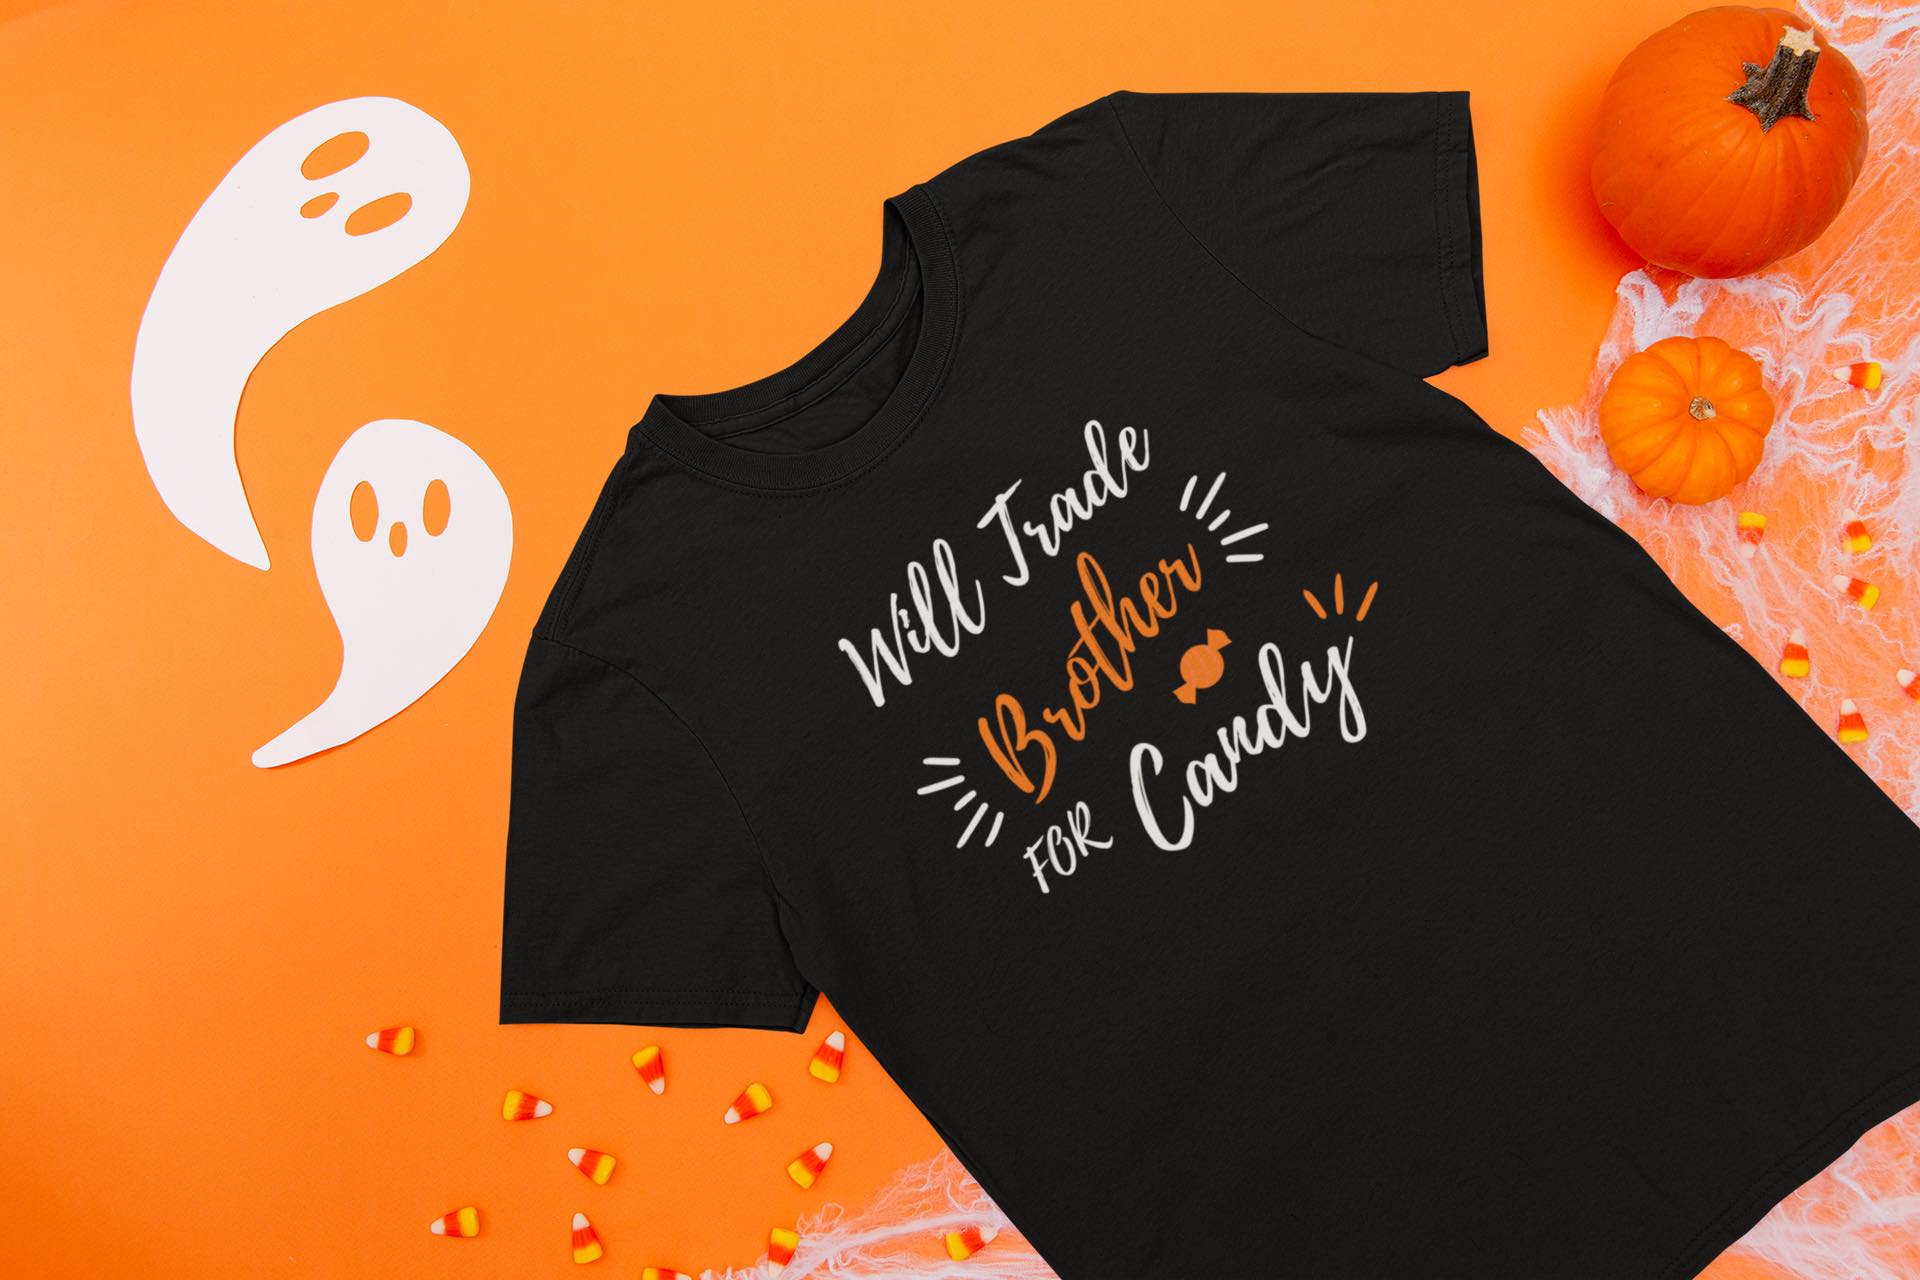 Will trade brother for candy Halloween T-shirt - Three2Tango Tee's